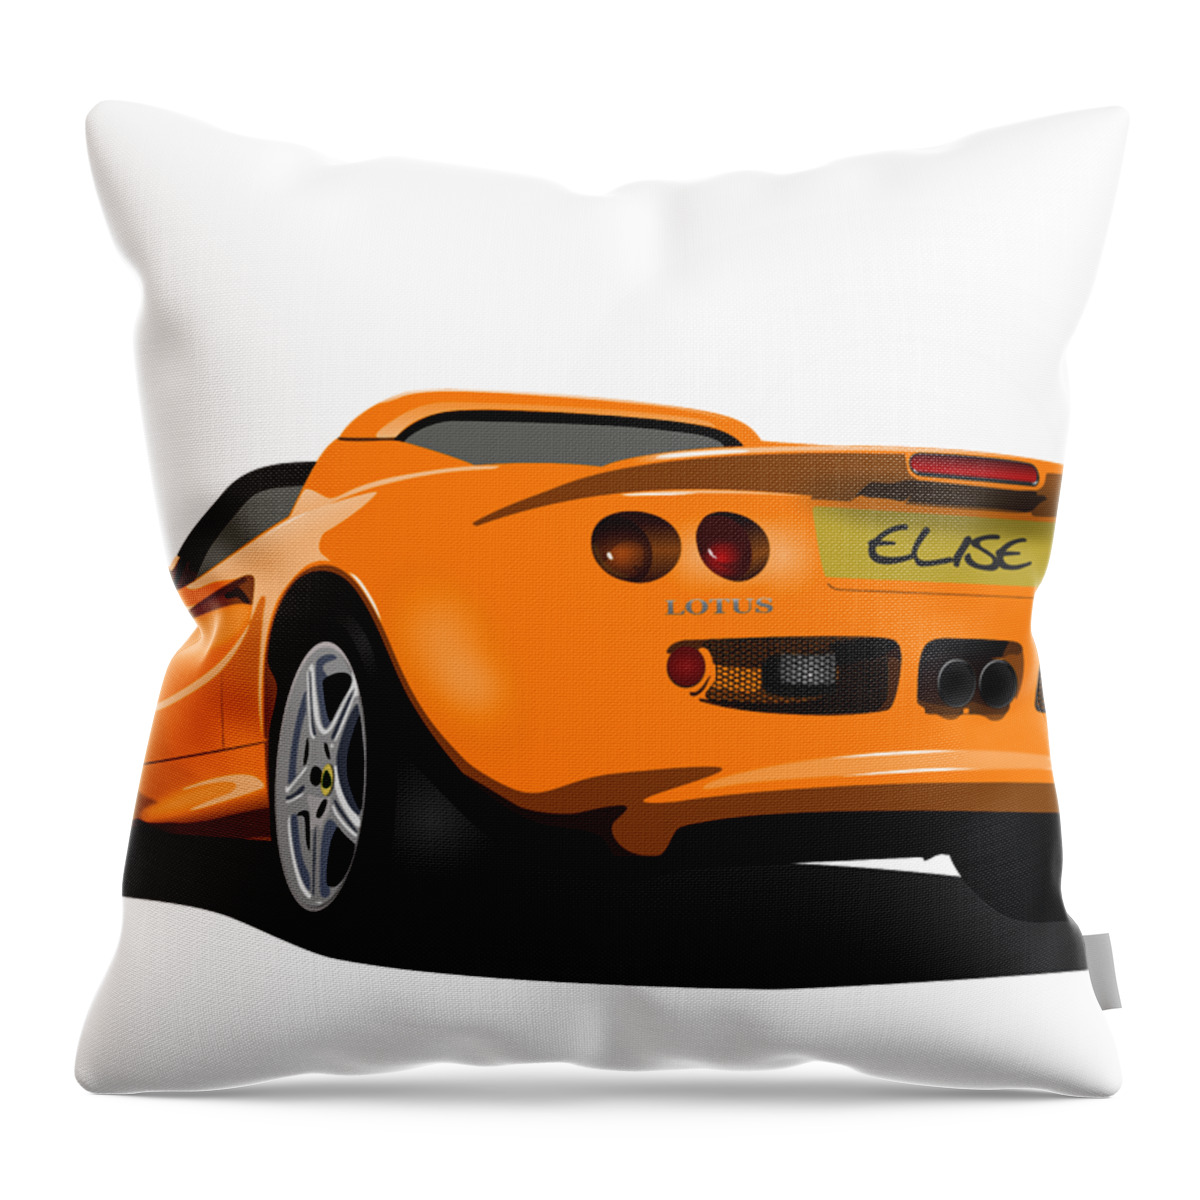 Sports Car Throw Pillow featuring the digital art Orange S1 Series One Elise Classic Sports Car by Moospeed Art